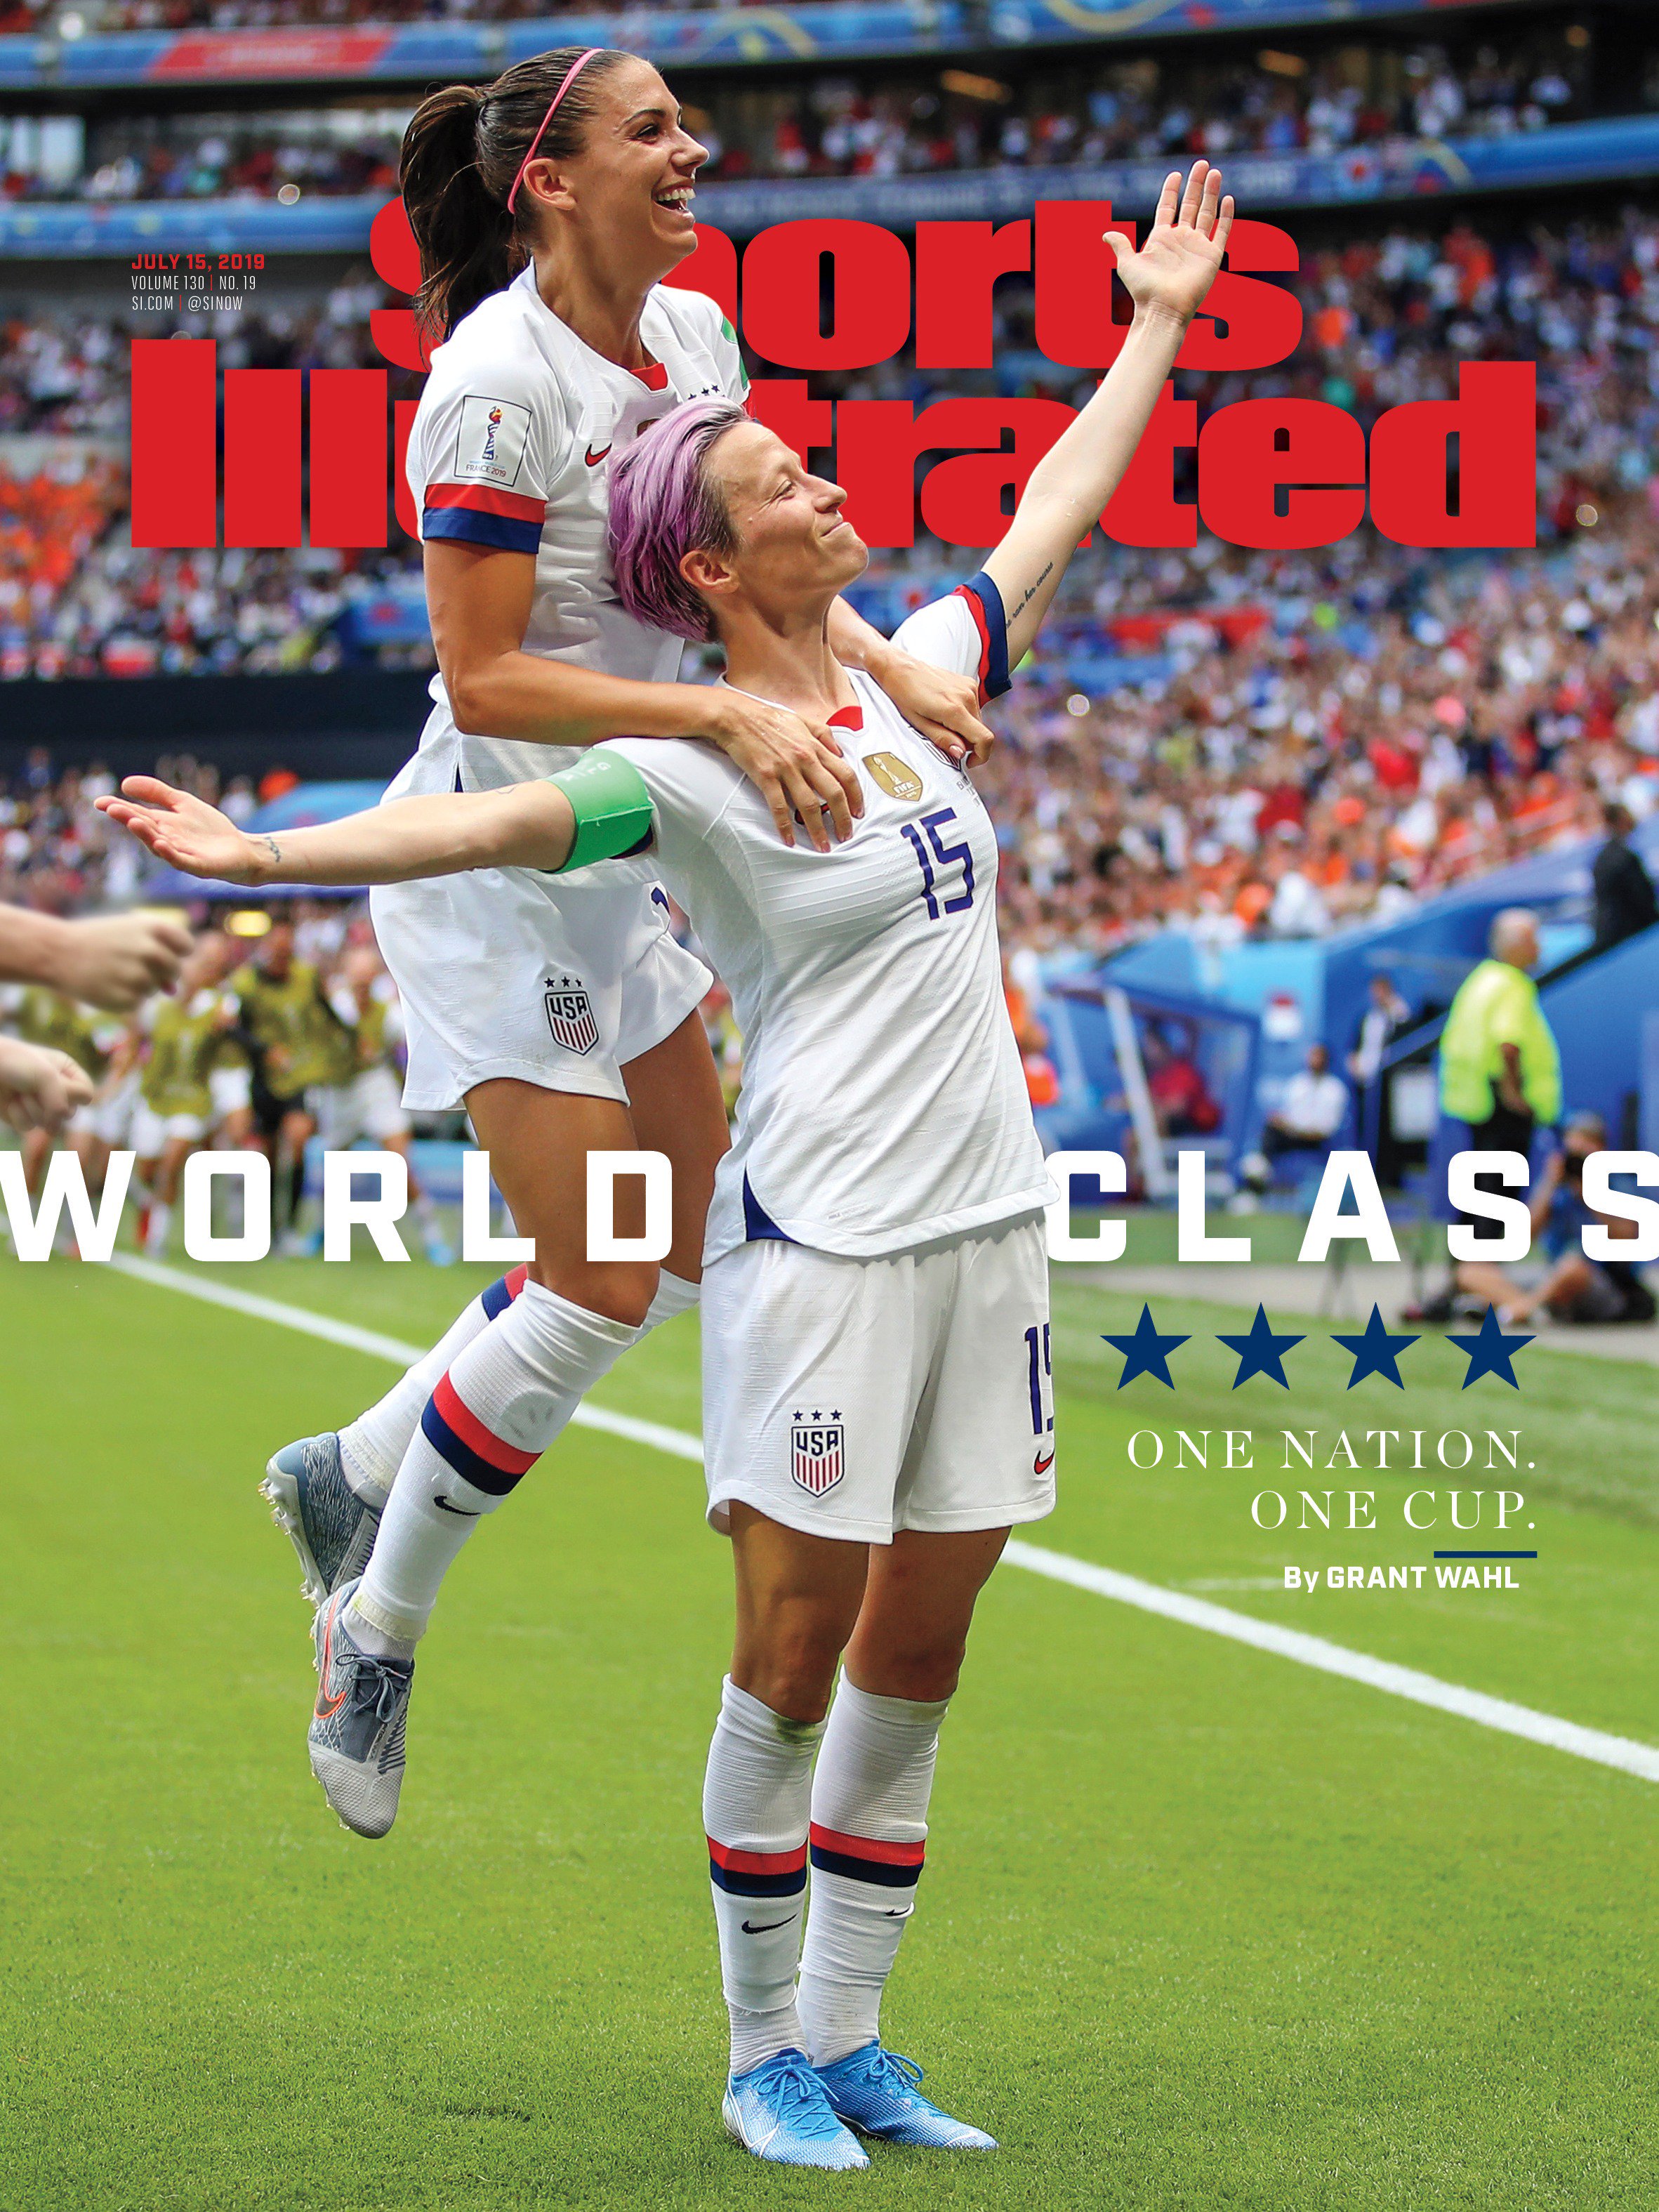 Alex Morgan And Megan Rapinoe Land The Cover Of Sports Illustrated